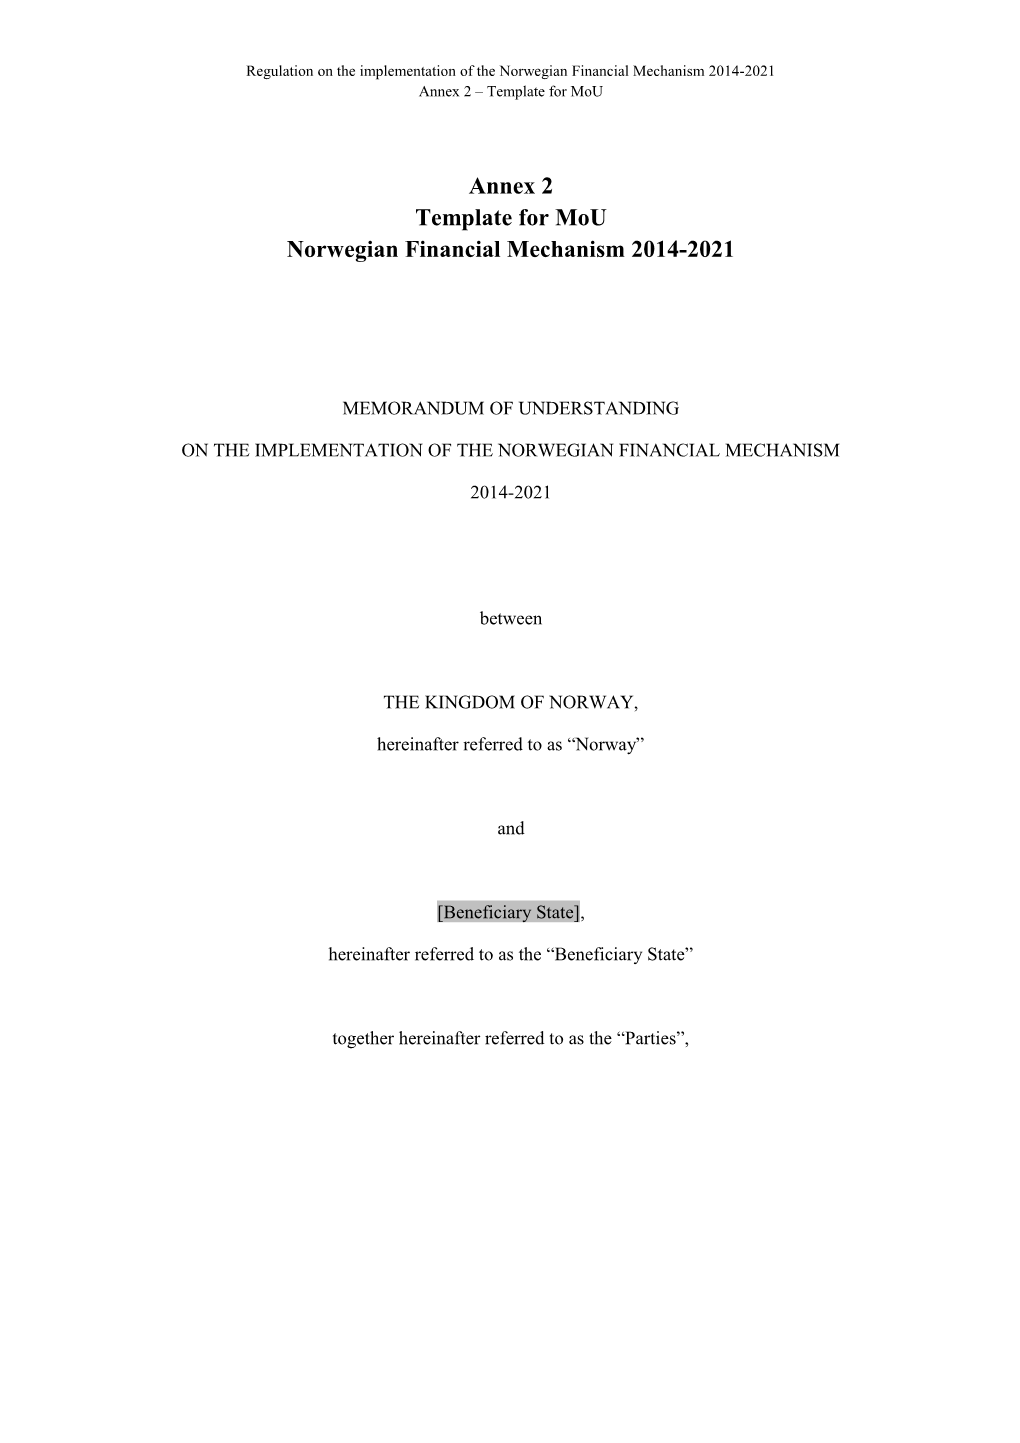 Regulation on the Implementation of the Norwegian Financial Mechanism 2014-2021